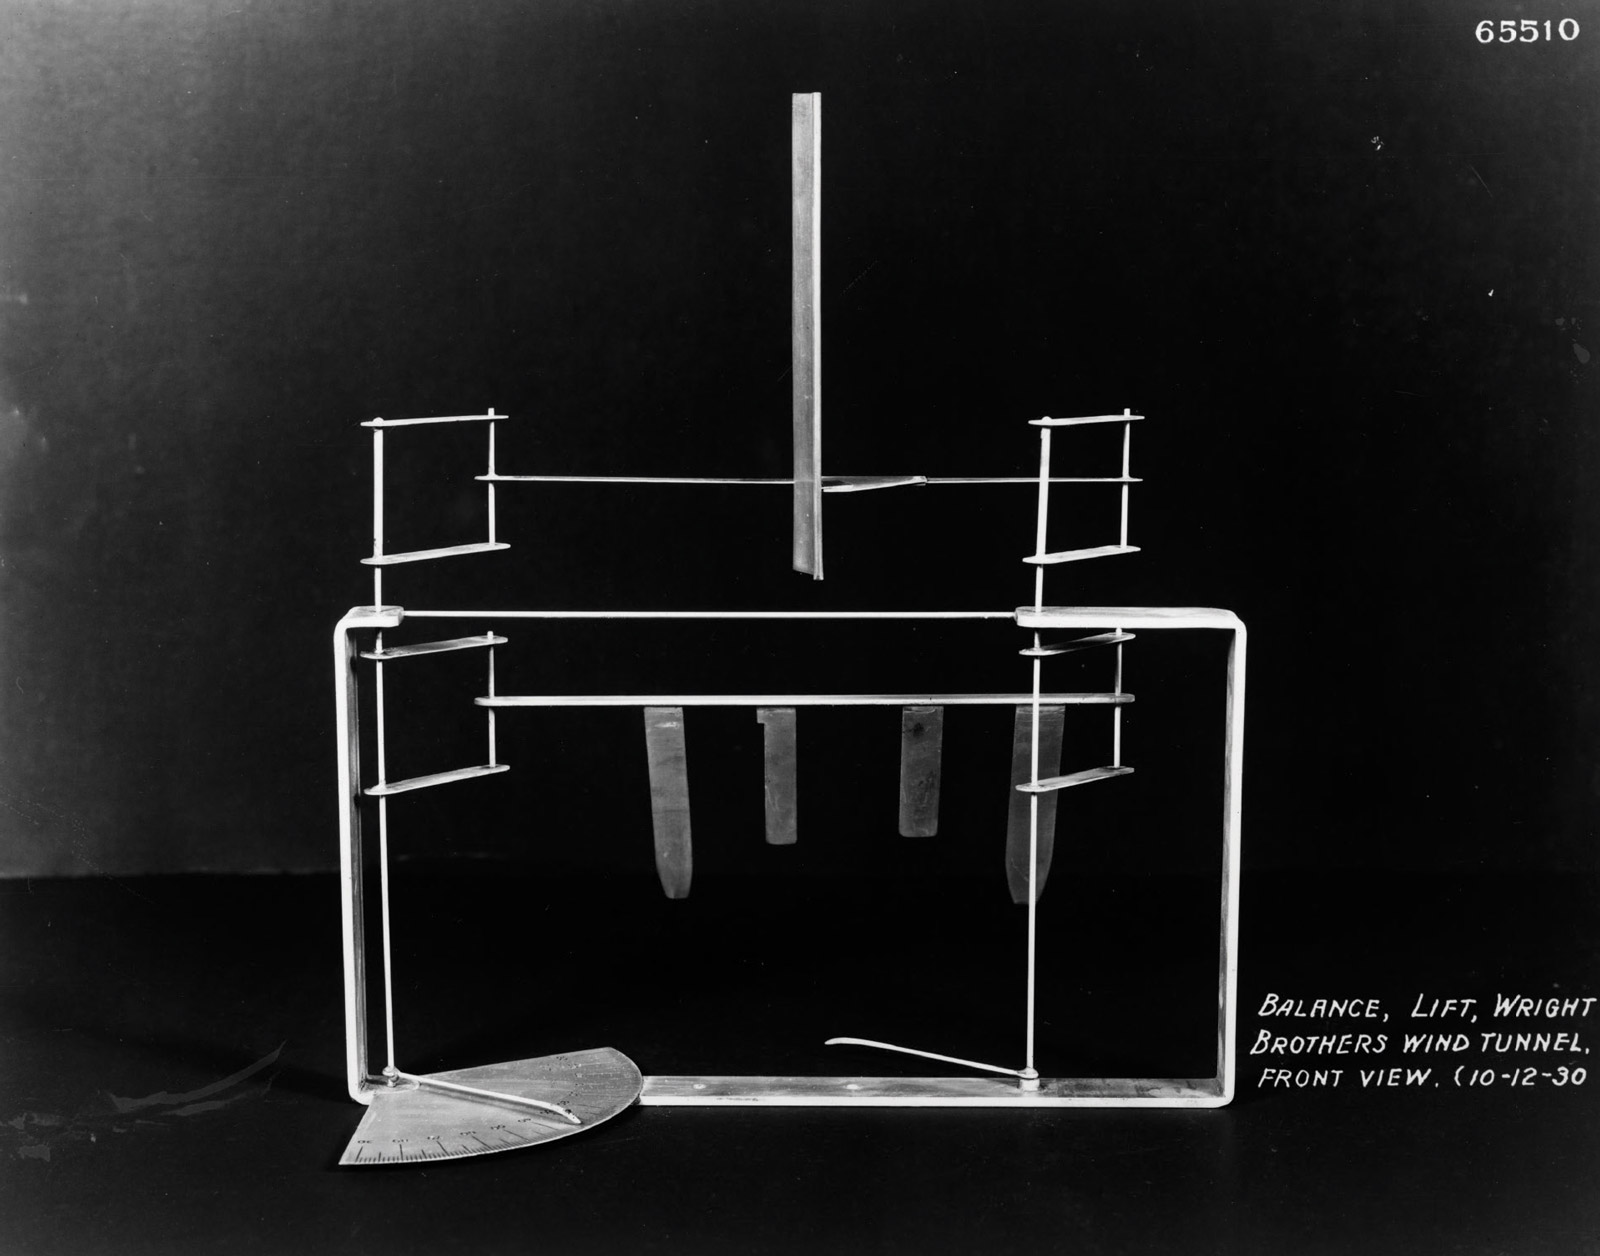 A photograph of a 1930 reconstruction of the Wright brothers’ 1901 lift balance.